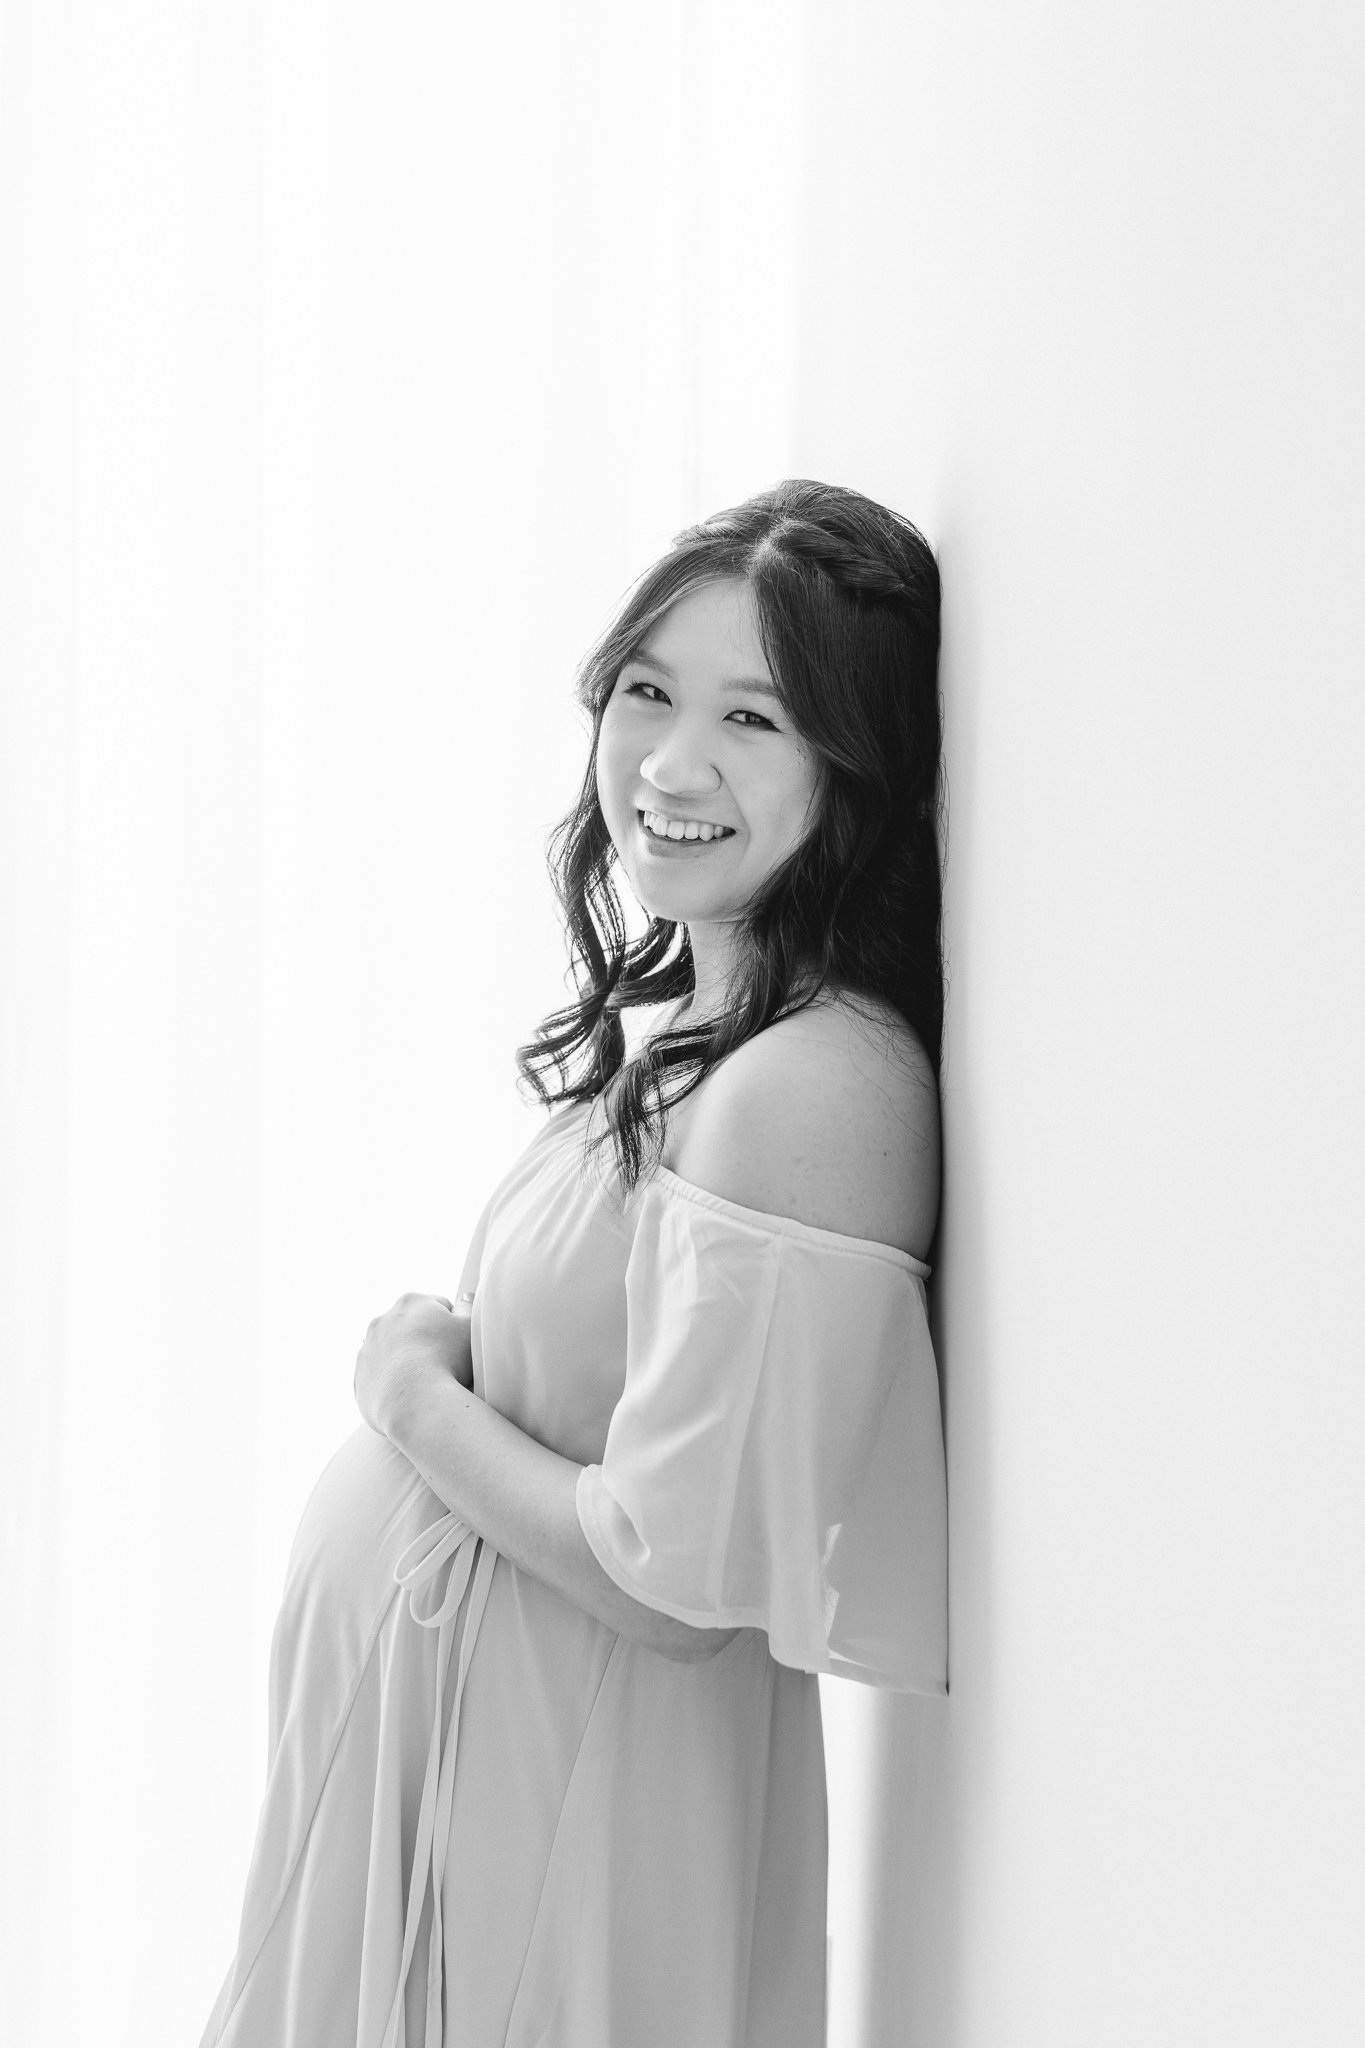  Nicole Hawkins Photography captures a glowing mother holding her belly and leaning against a wall. glowing maternity shot black and white #NicoleHawkinsPhotography #NicoleHawkinsMaternity #MaternityPhotography #Maternitystyle #NJMaternity #TimelessP